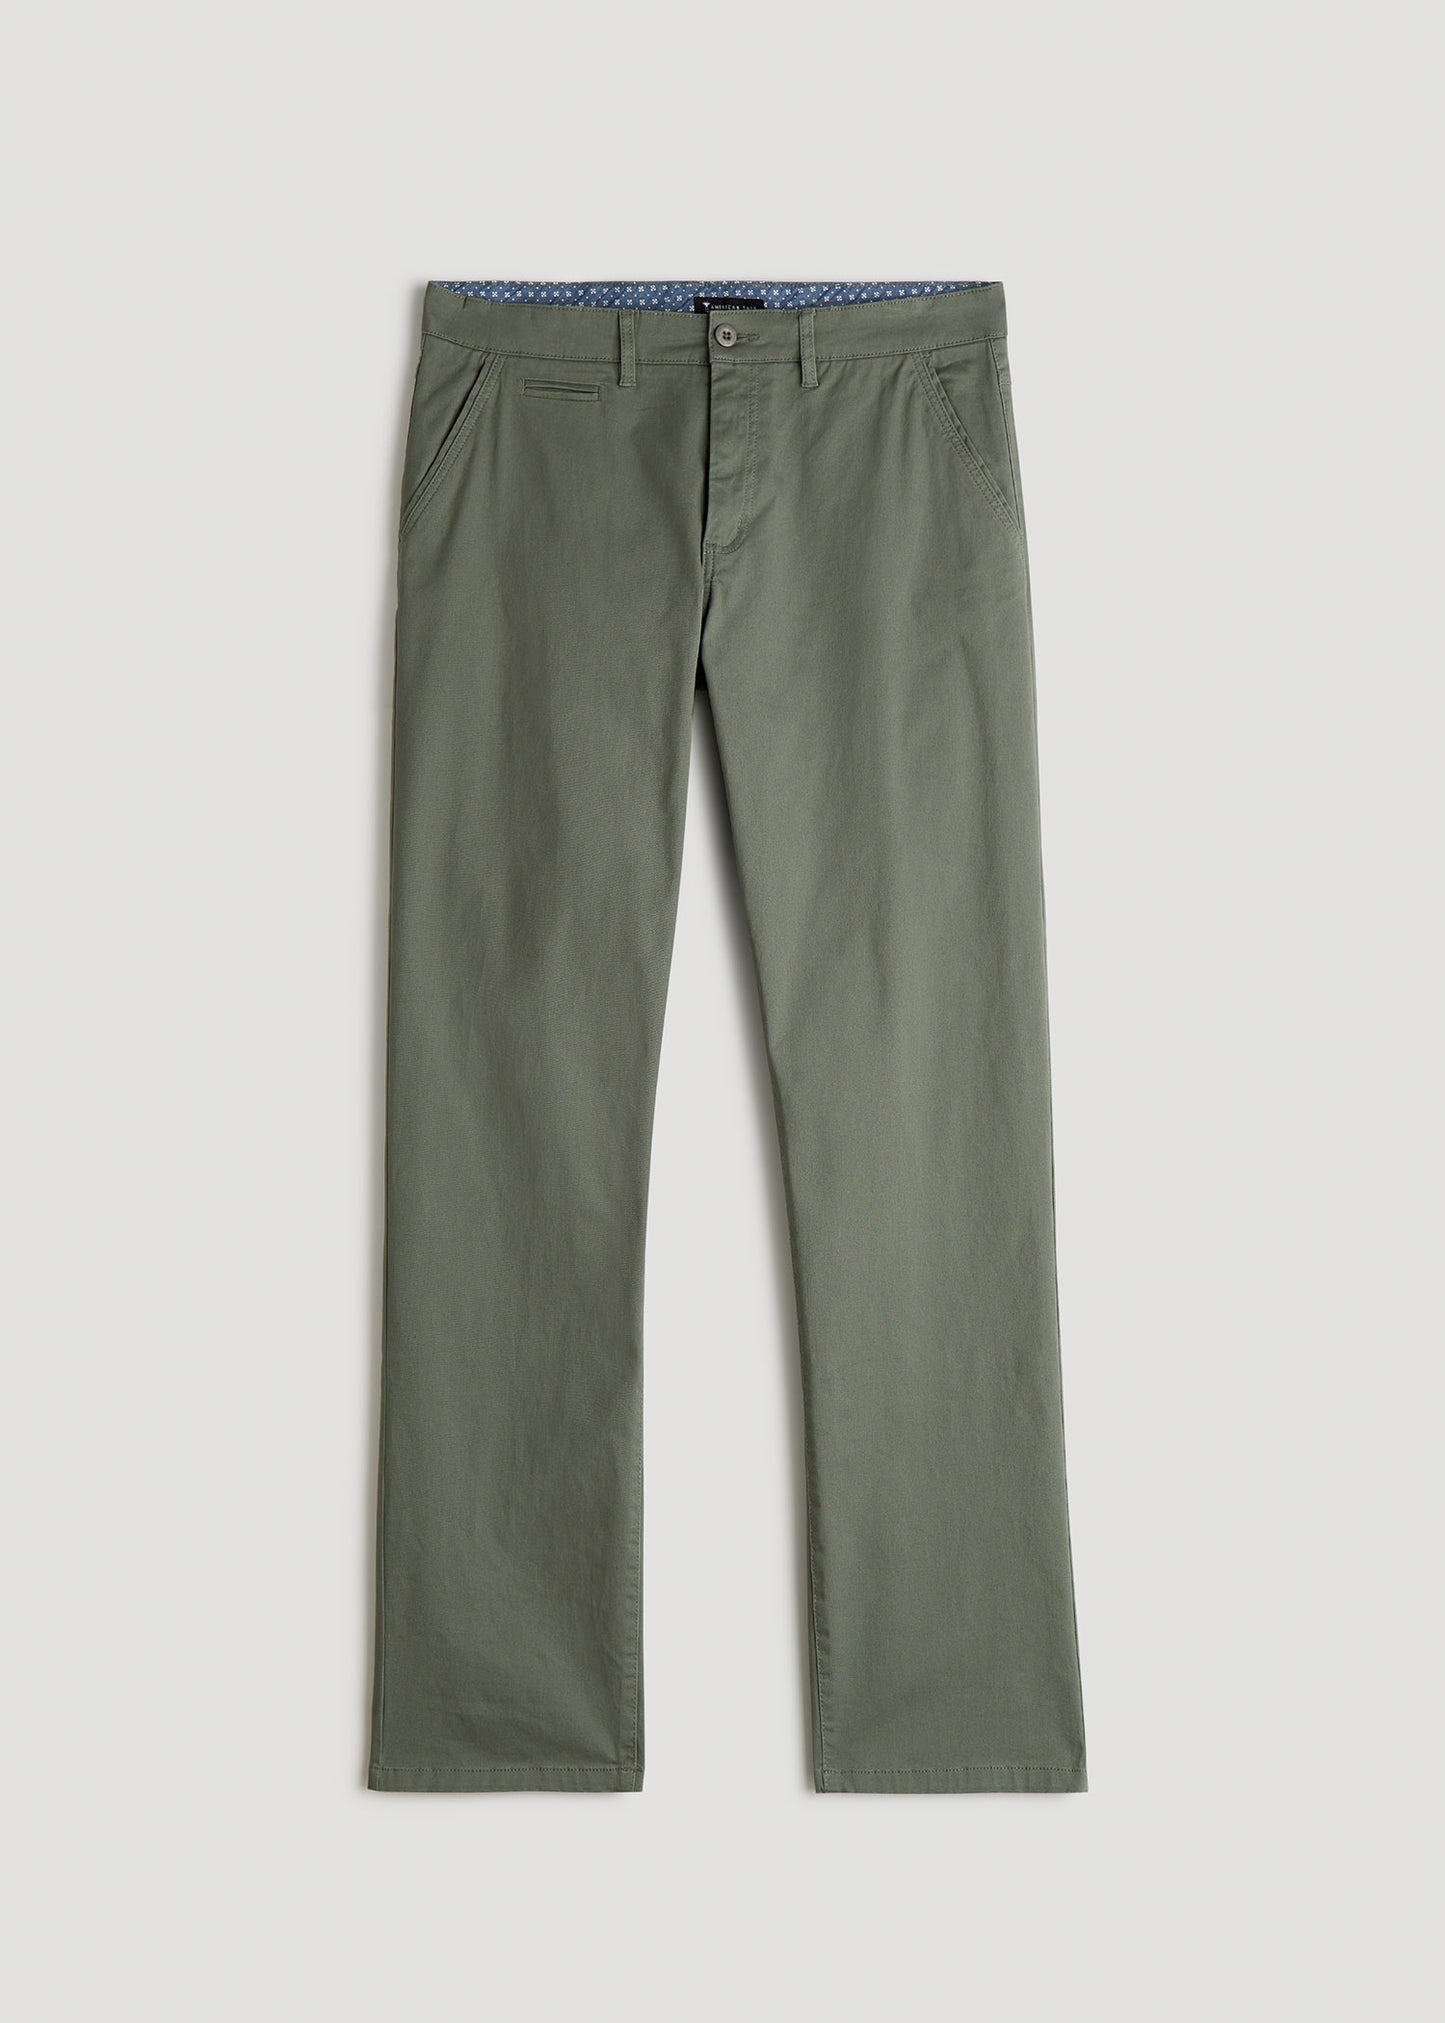 Mason SEMI-RELAXED Chinos in Chocolate - Pants for Tall Men